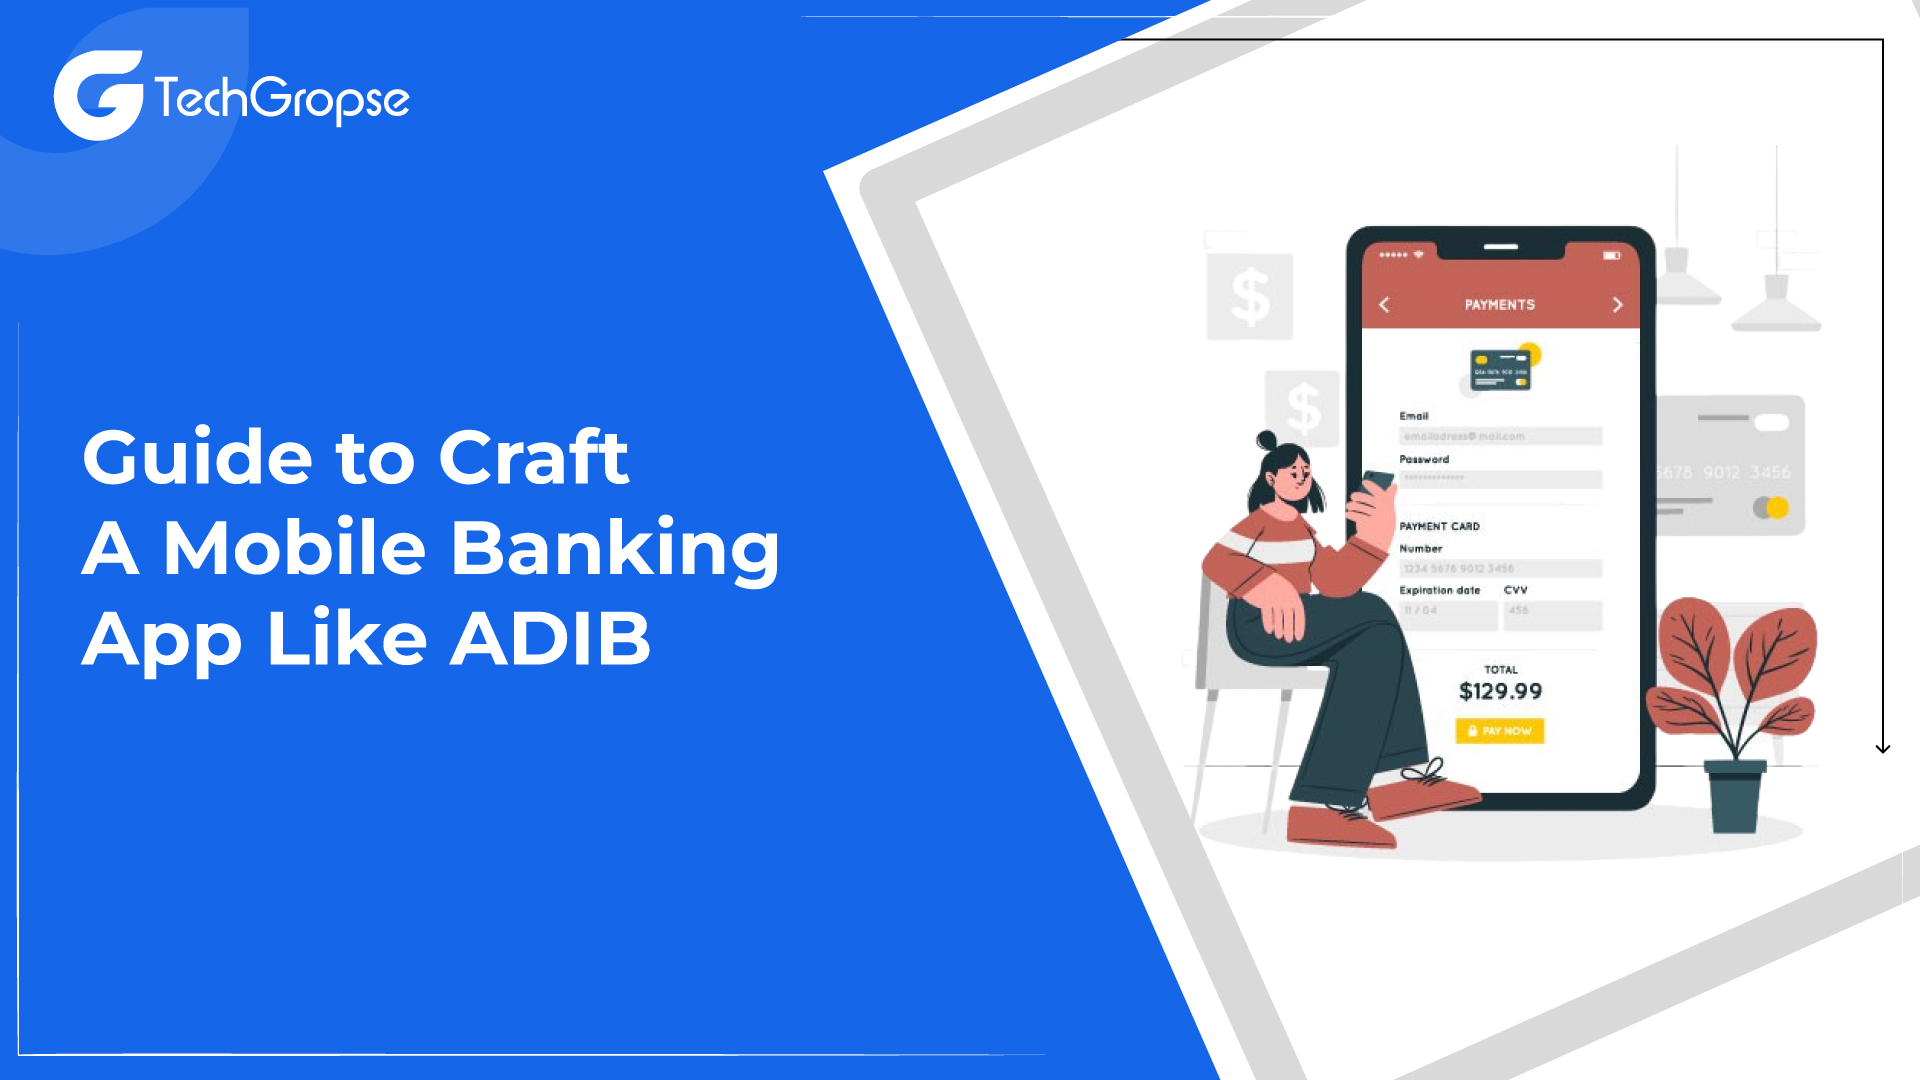 Guide to Craft A Mobile Banking App Like ADIB